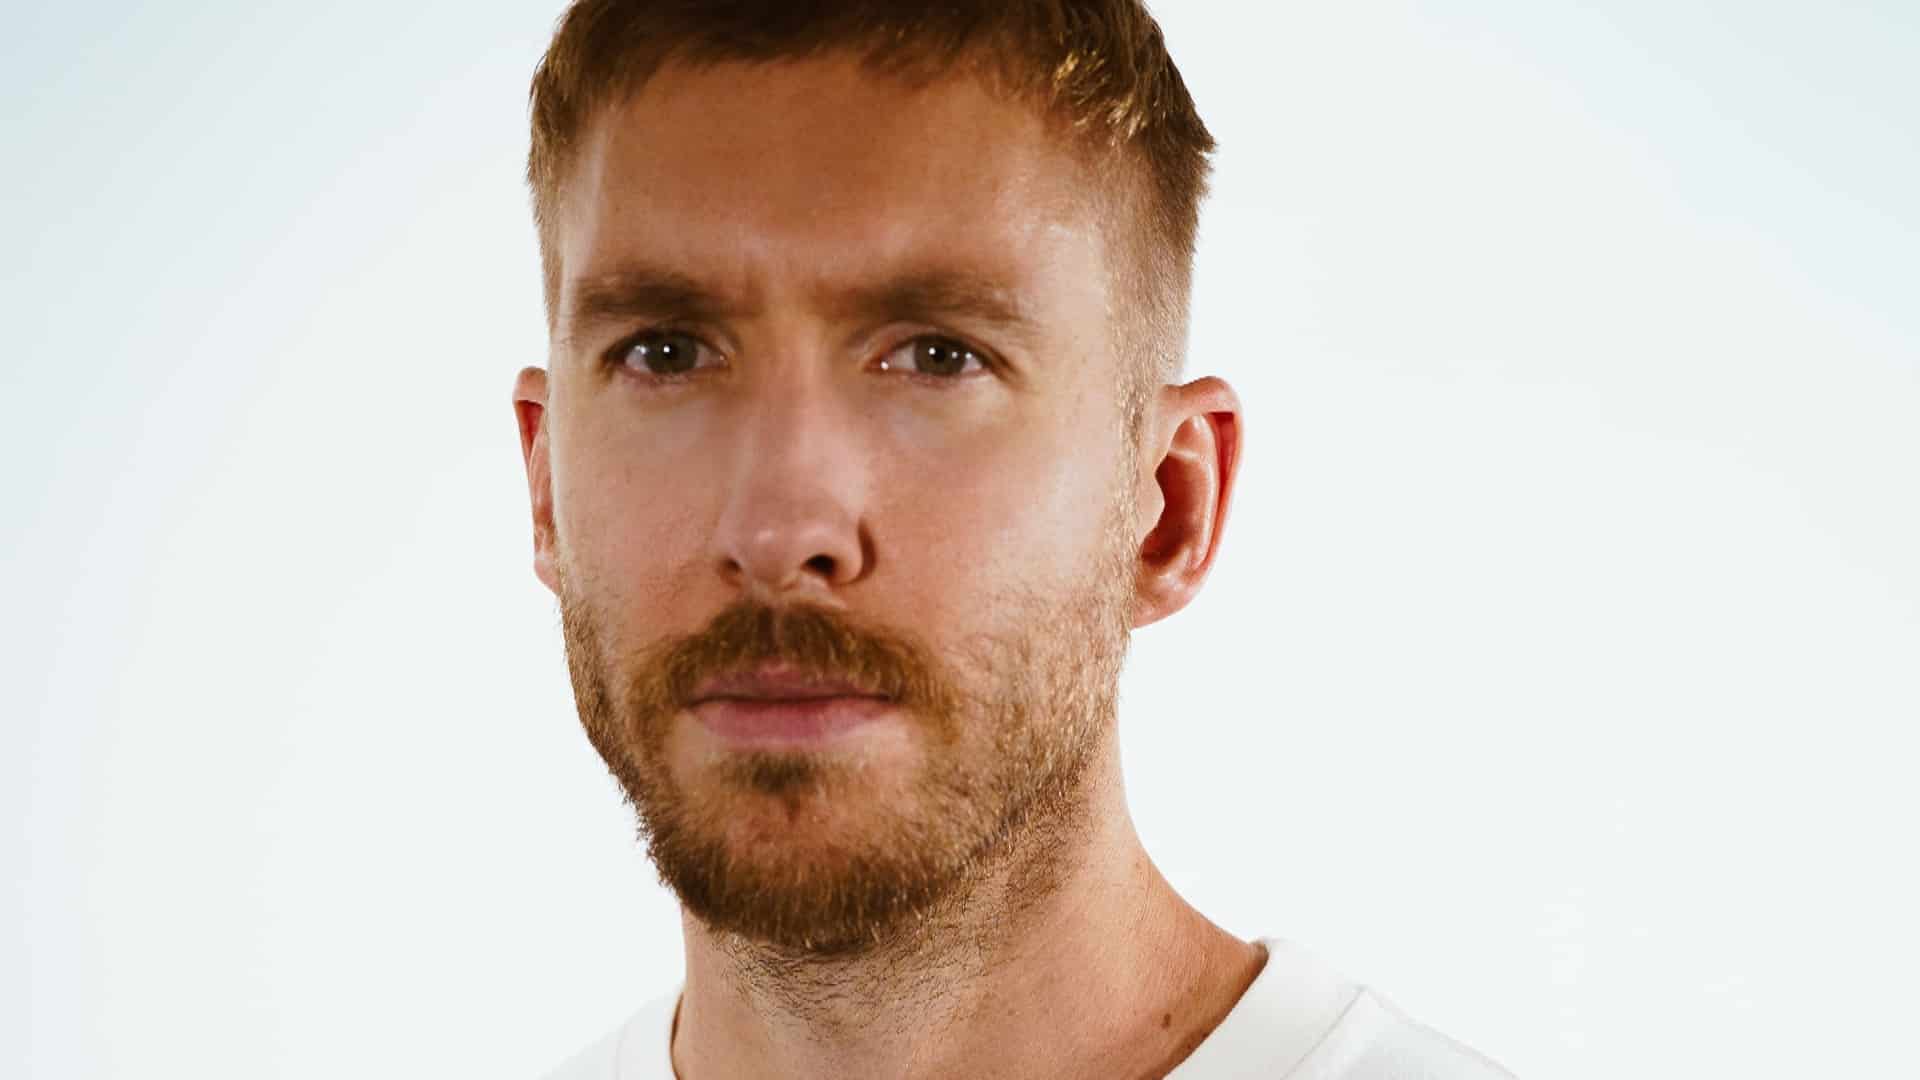 Calvin Harris links up with Justin Timberlake, Halsey, and Pharrell Williams on ‘Stay With Me’: Listen